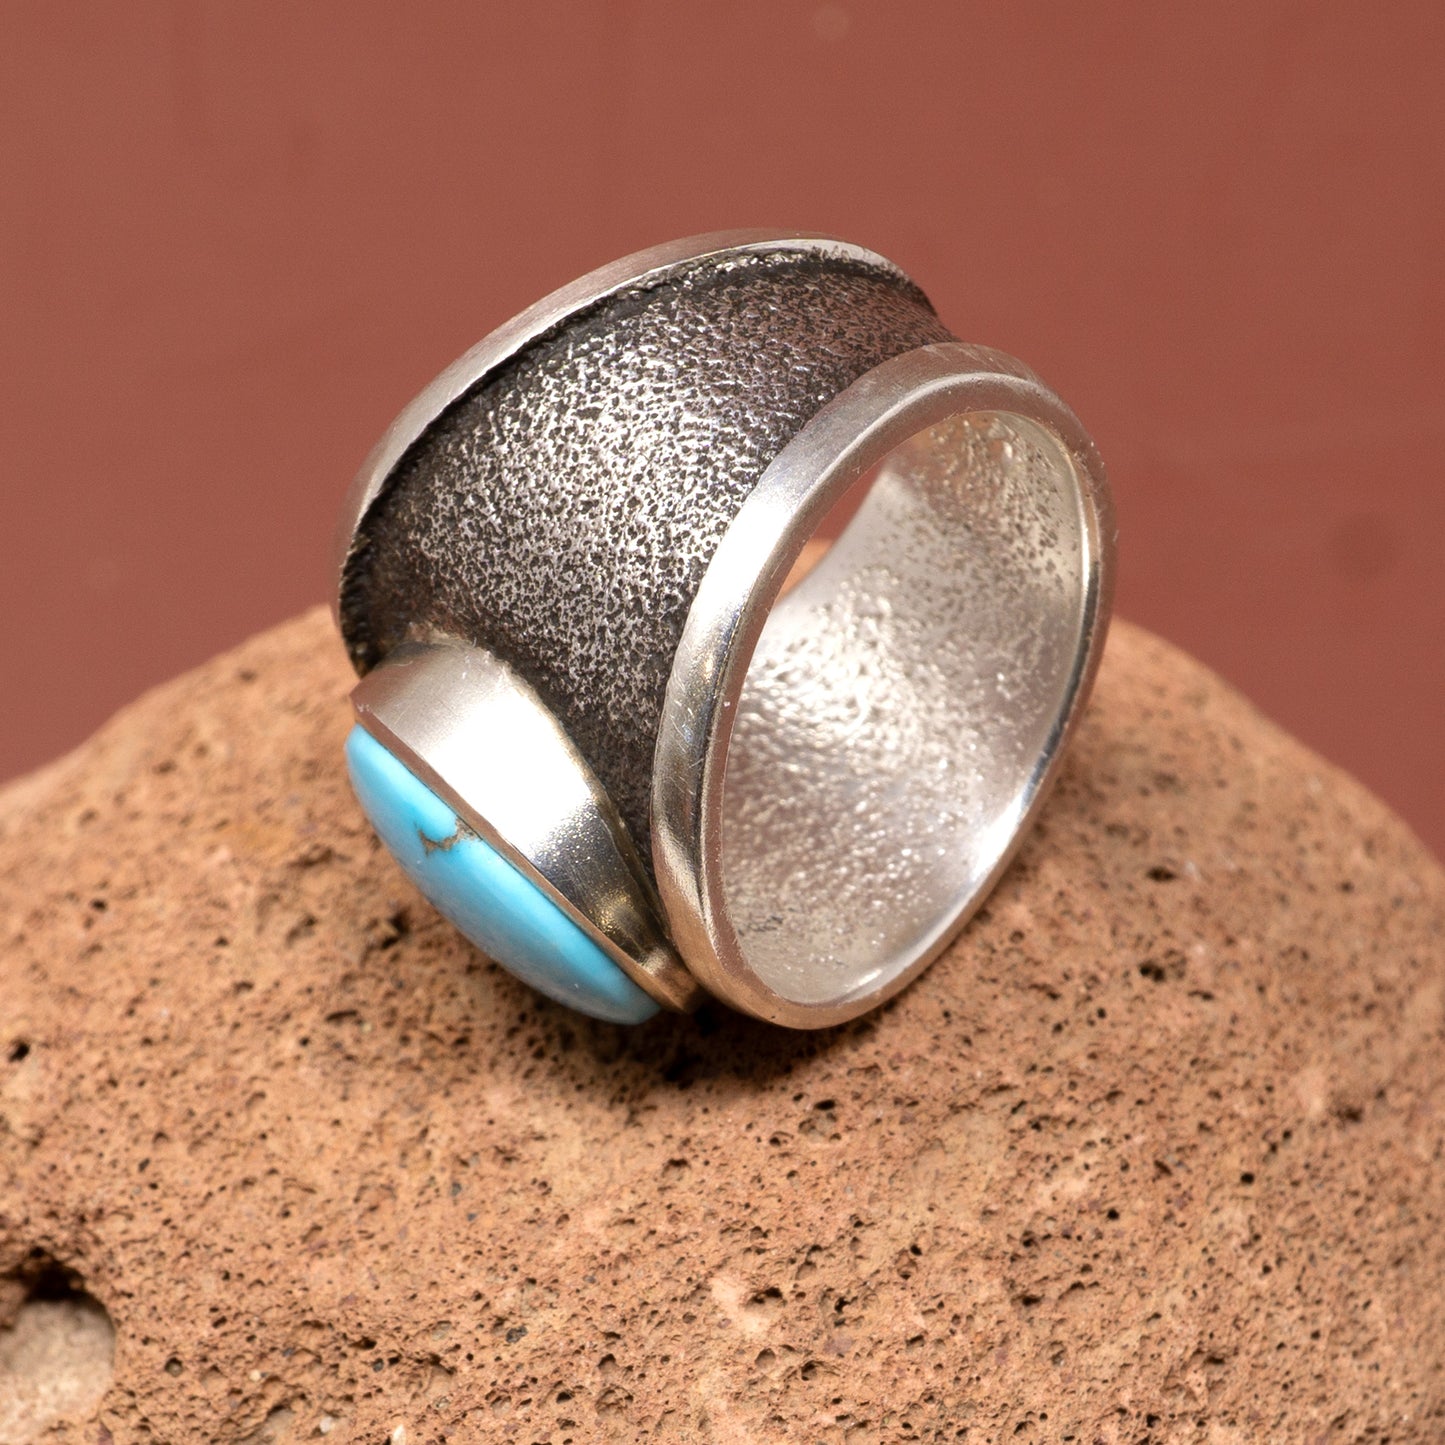 Turquoise Cabochon Set in Cast Silver Band Ring | Size 8